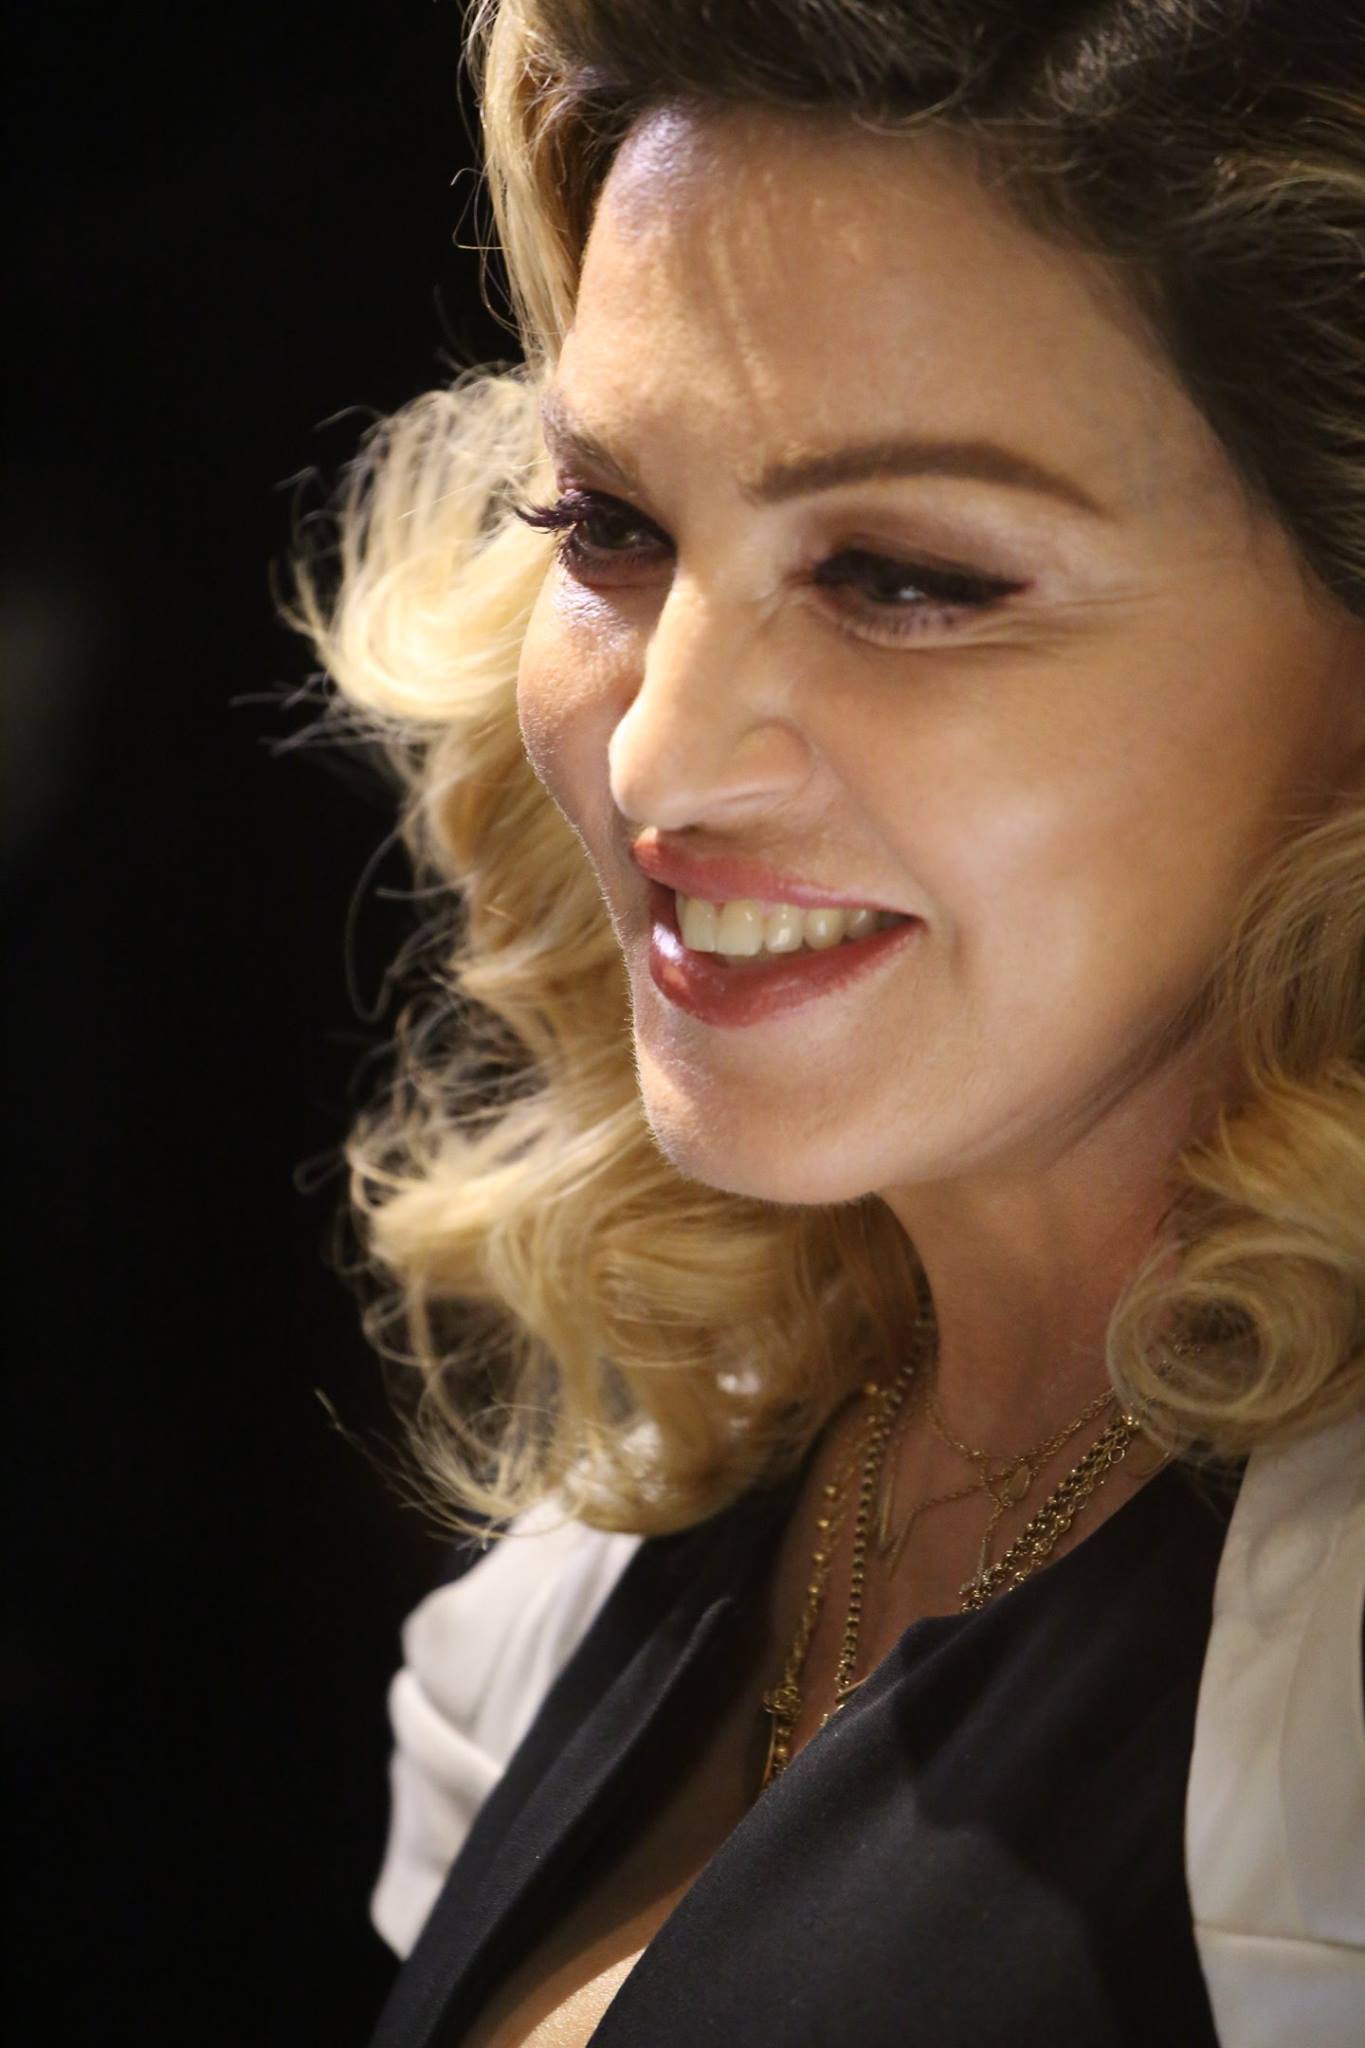 Madonna launches MDNA Skin in NYC - Mike Roda Photos